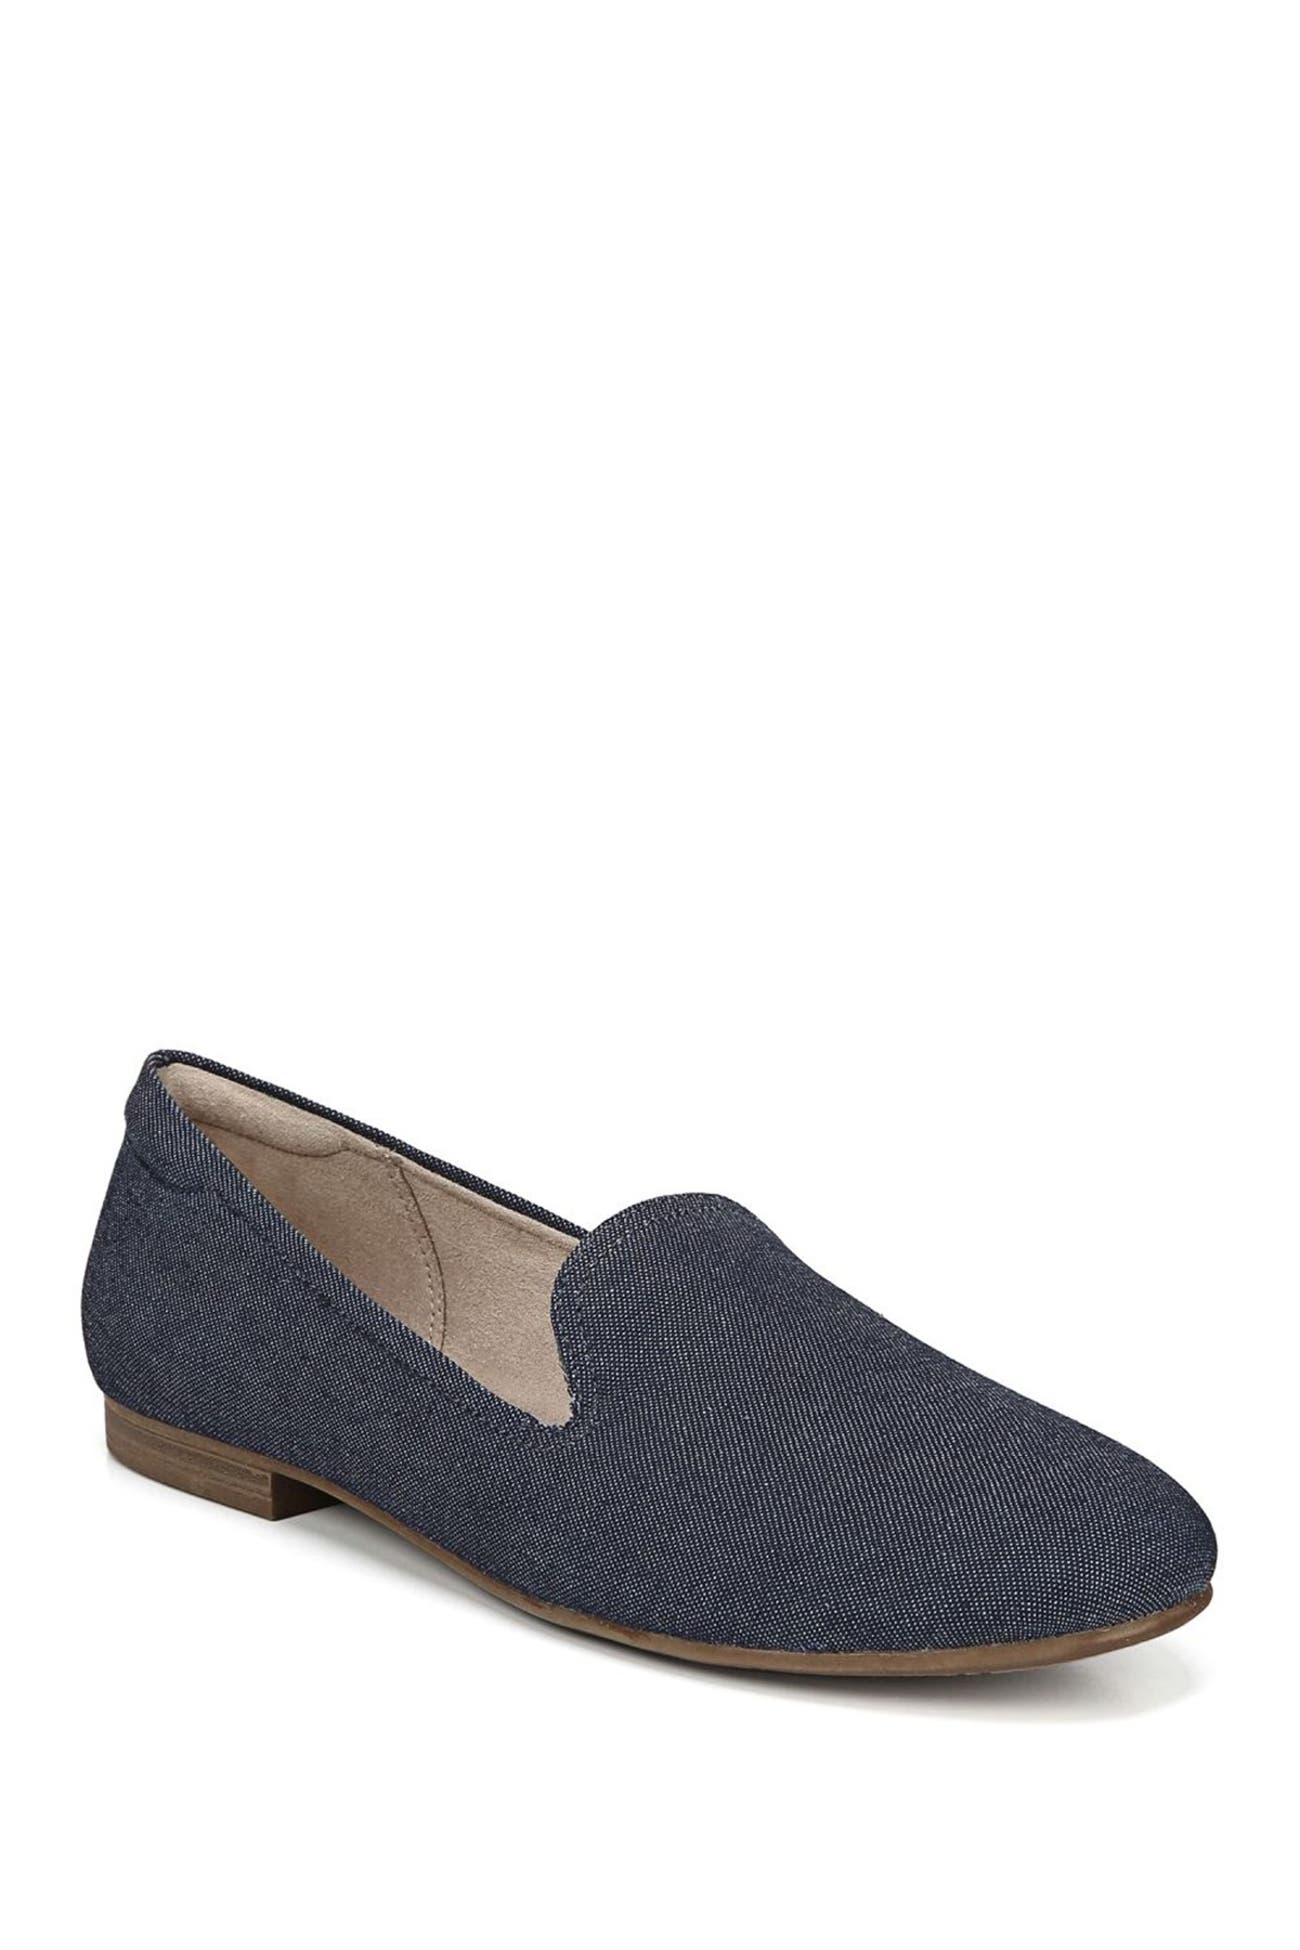 SOUL Naturalizer | Alexis Flat - Wide Width Available | Nordstrom Rack